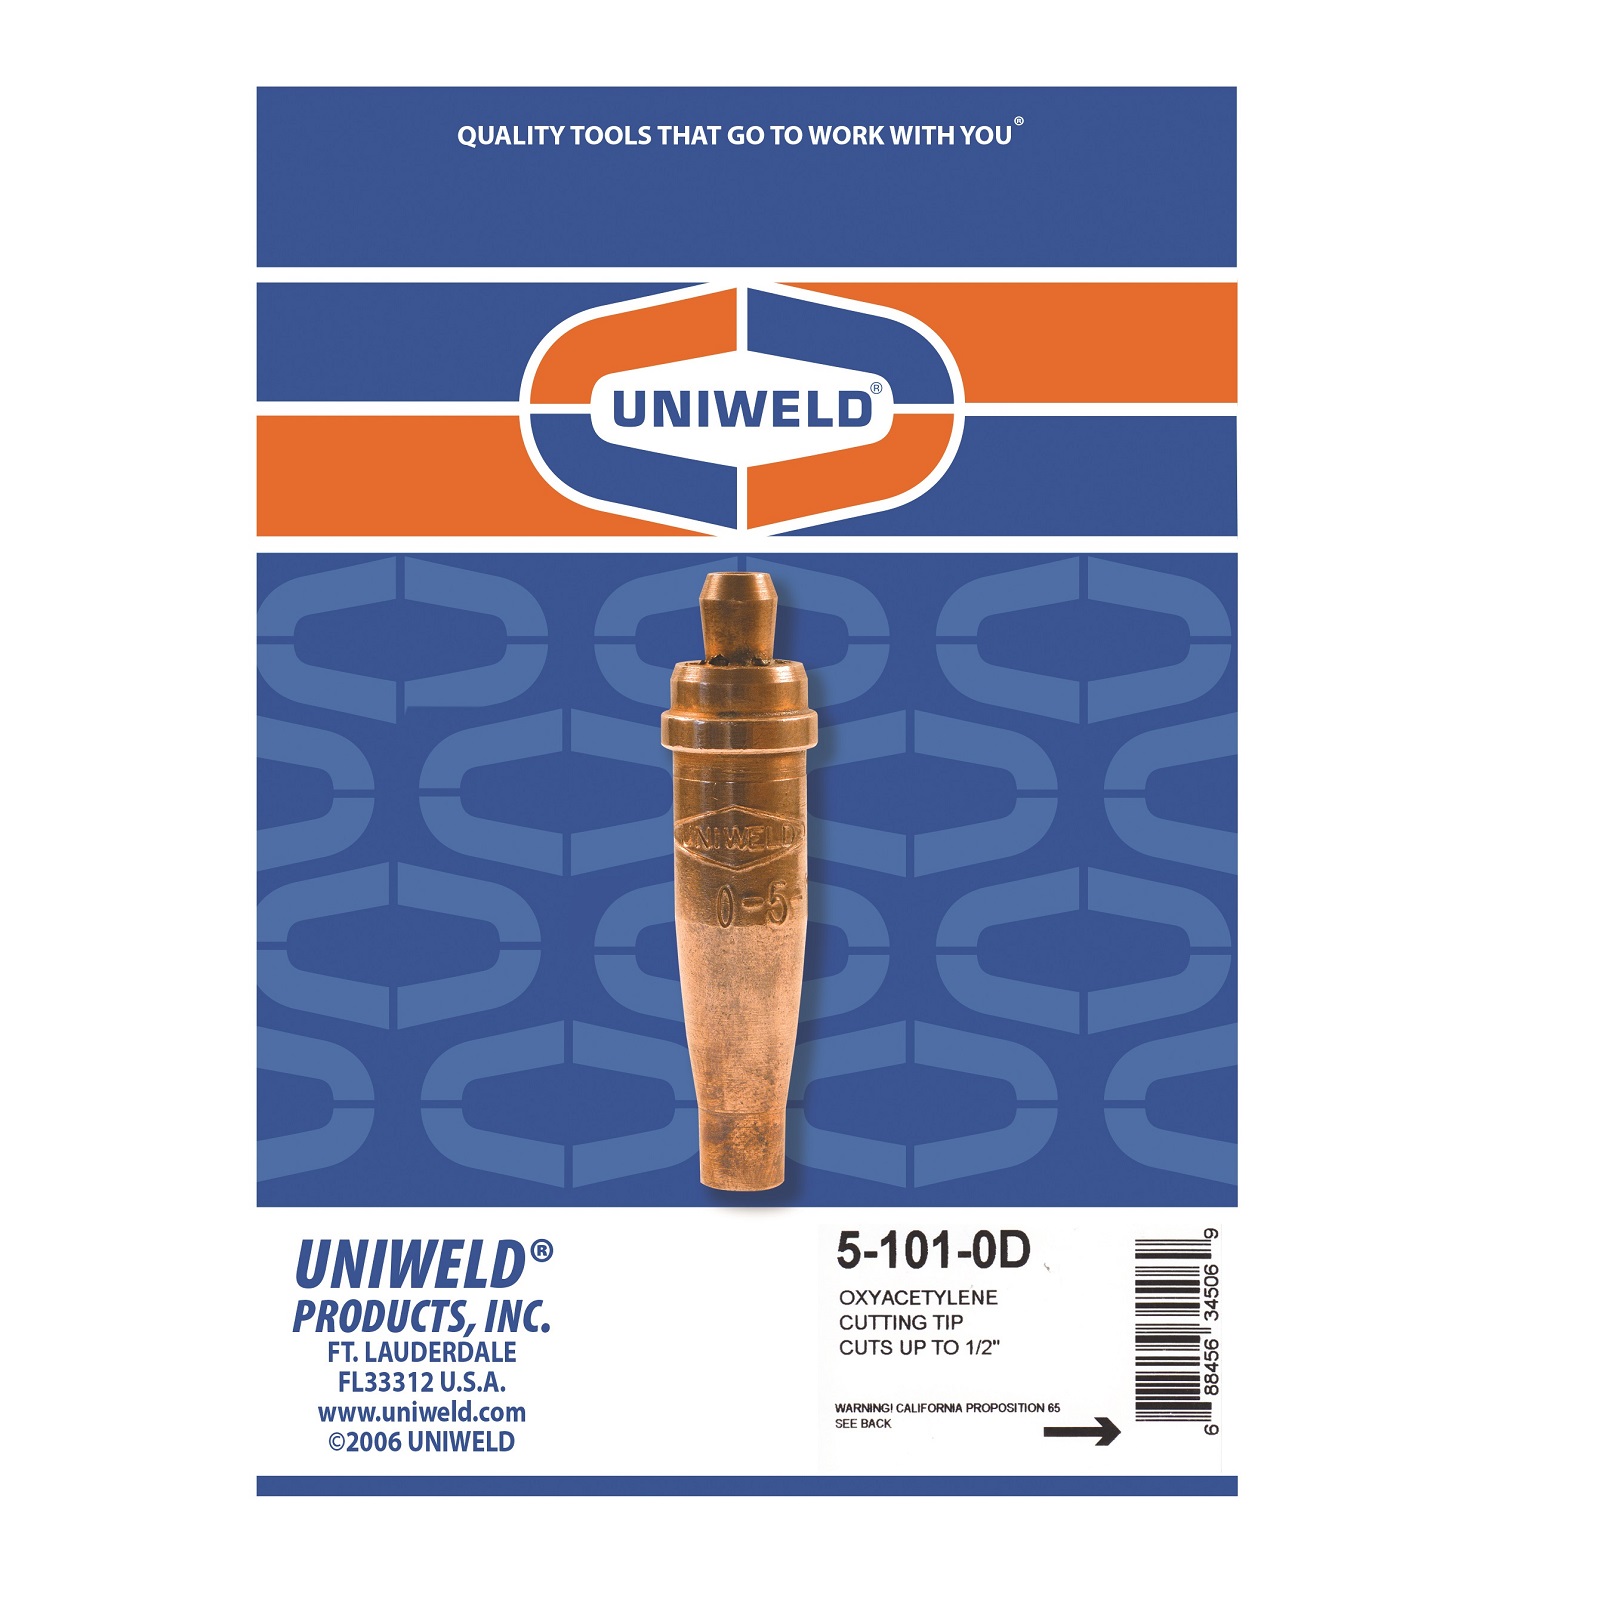 Uniweld 1-101A-0 Series Ameriflame Cutting Tip for Use with Oxygen and Acetylene 